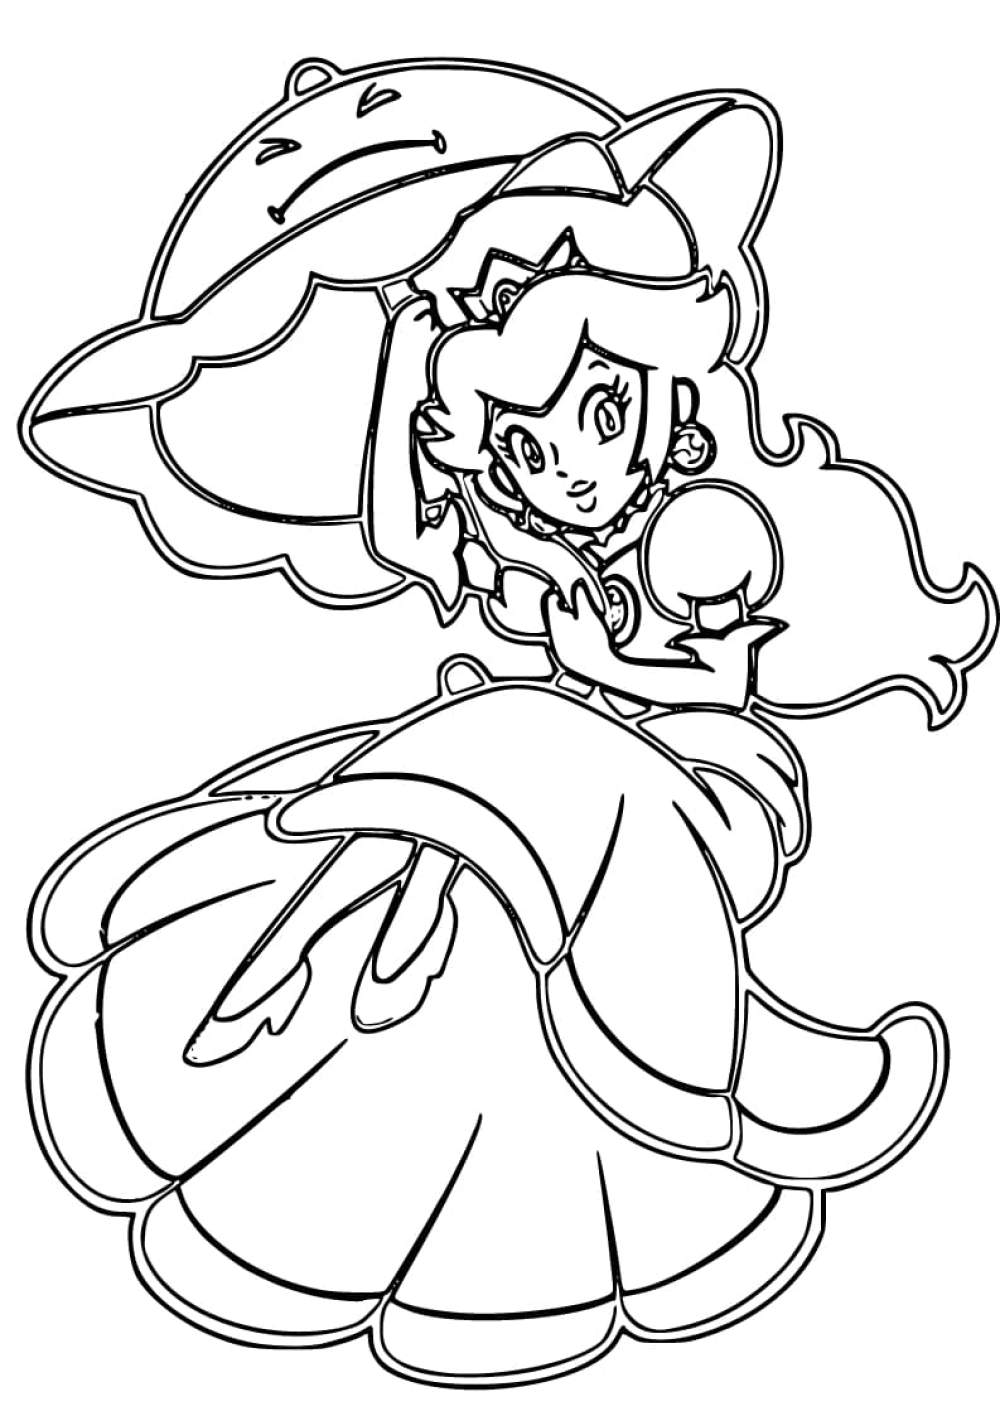 Princess peach coloring pages embrace creative excellence